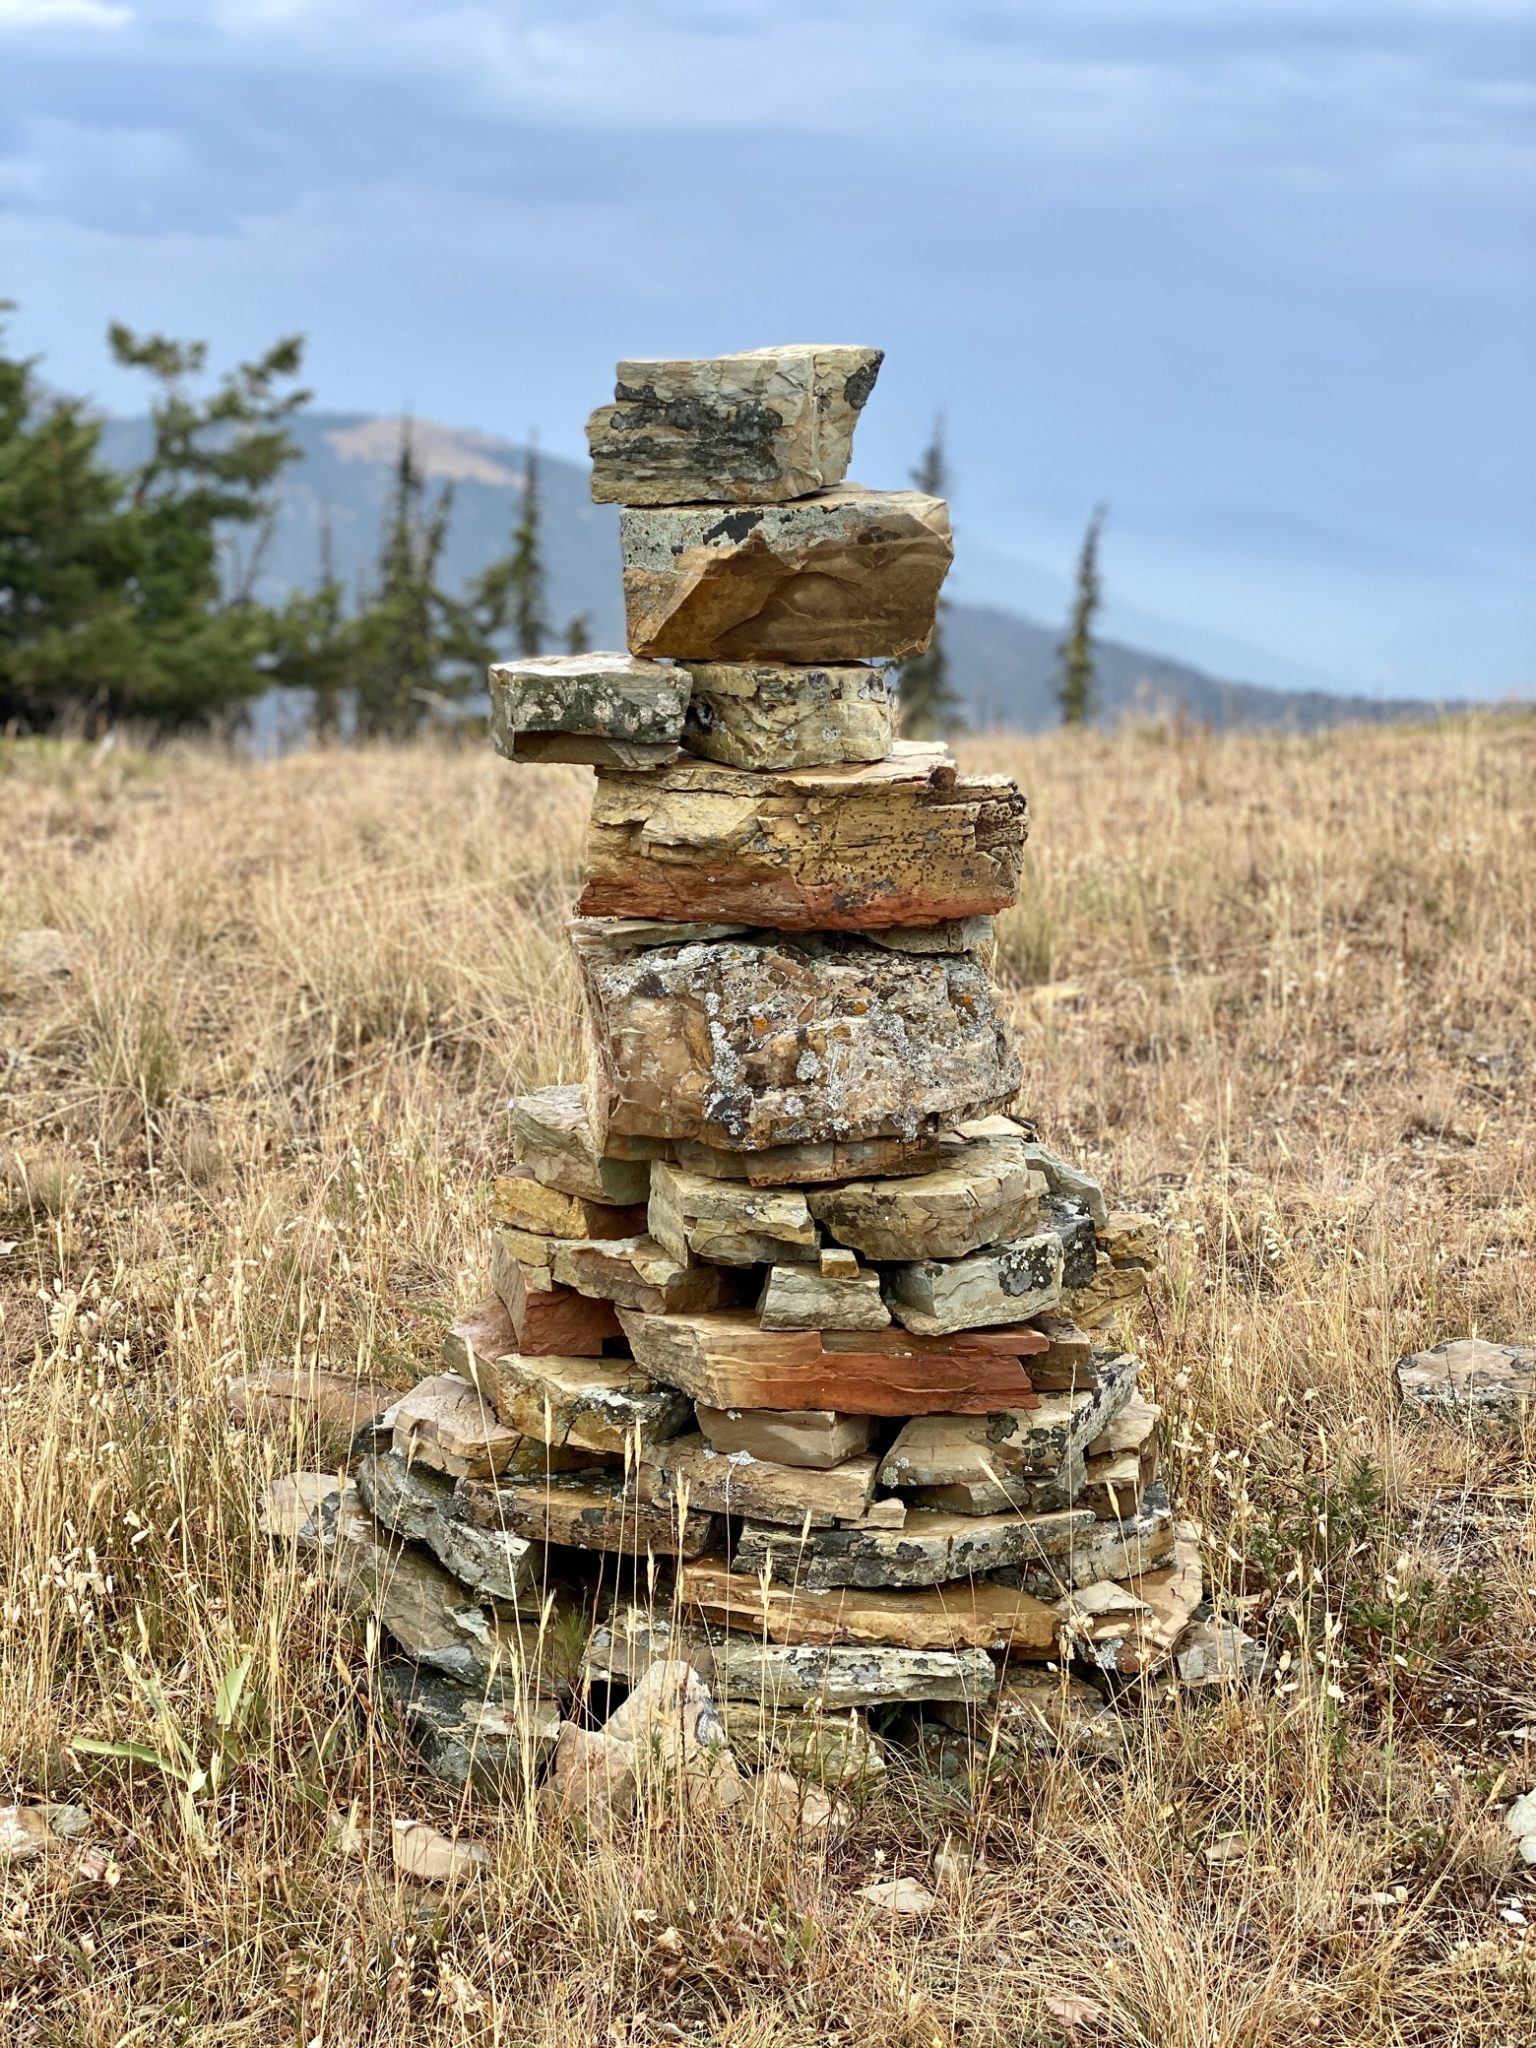 Cairn of brightly colored rock